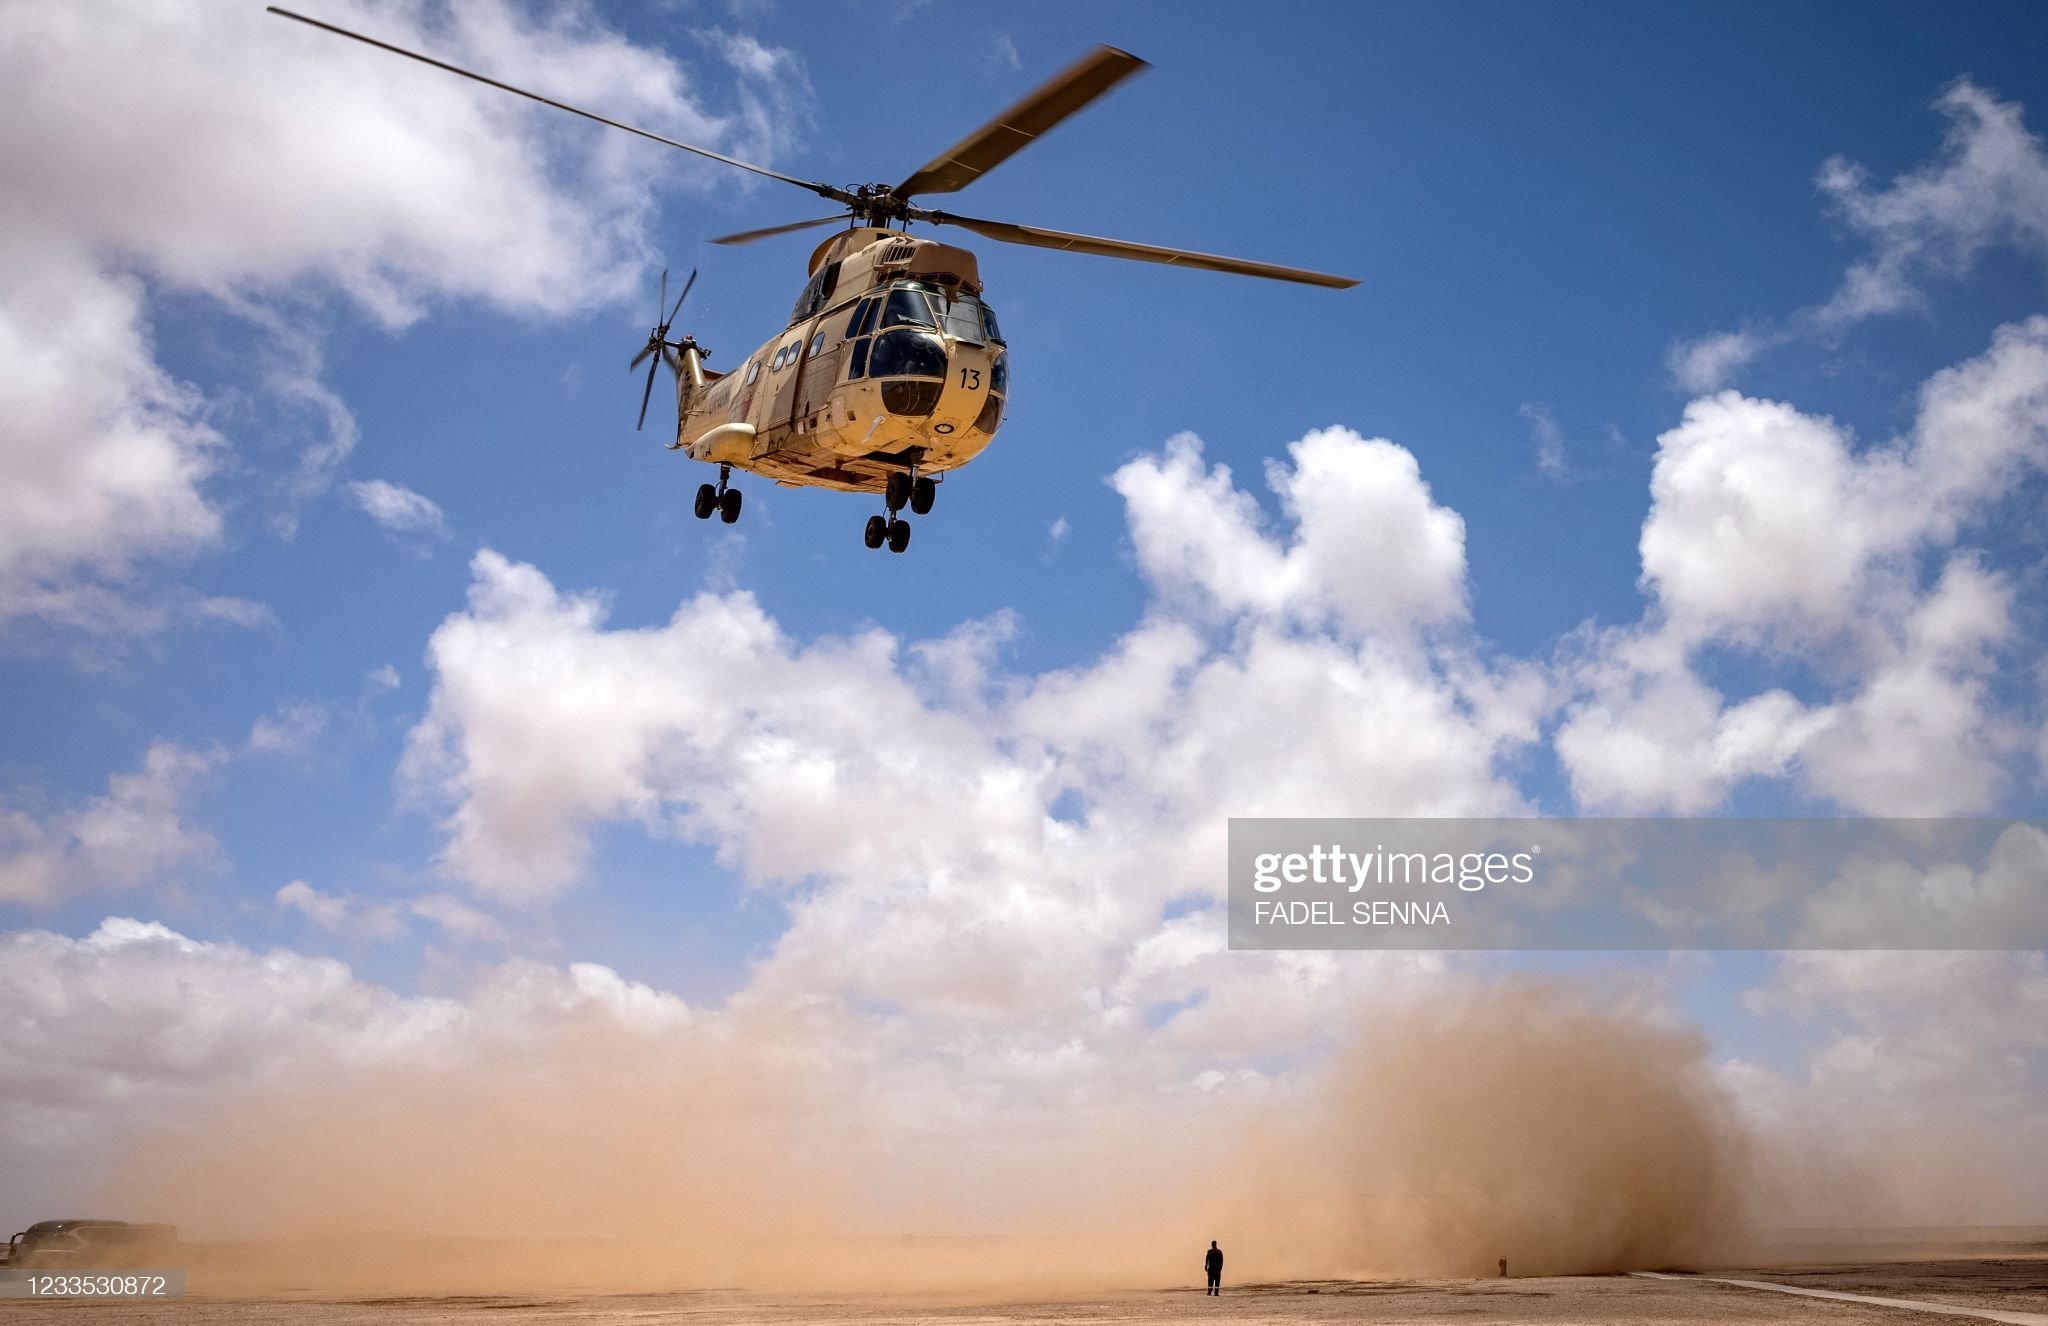 gettyimages-1233530872-2048x2048.jpg